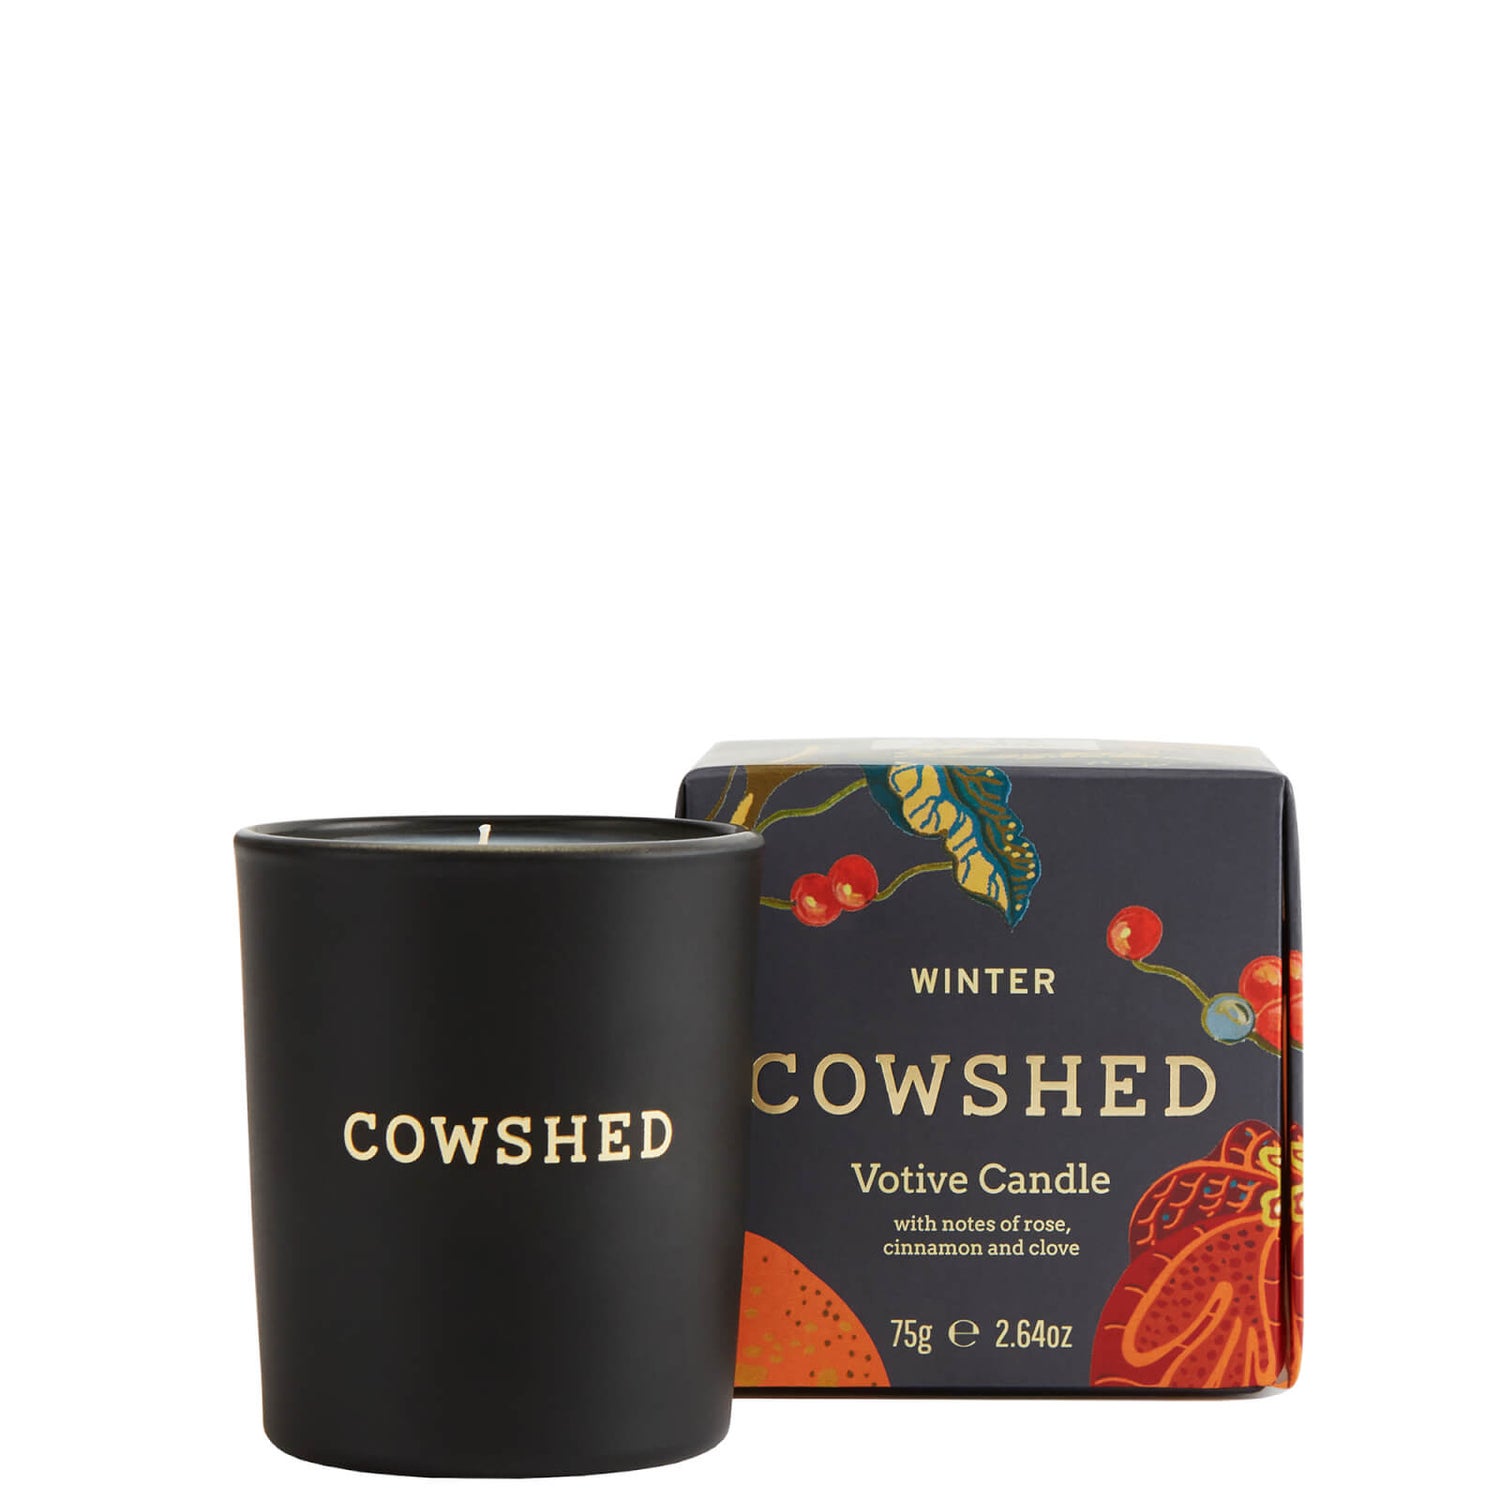 Cowshed Winter Votive Candle 75g